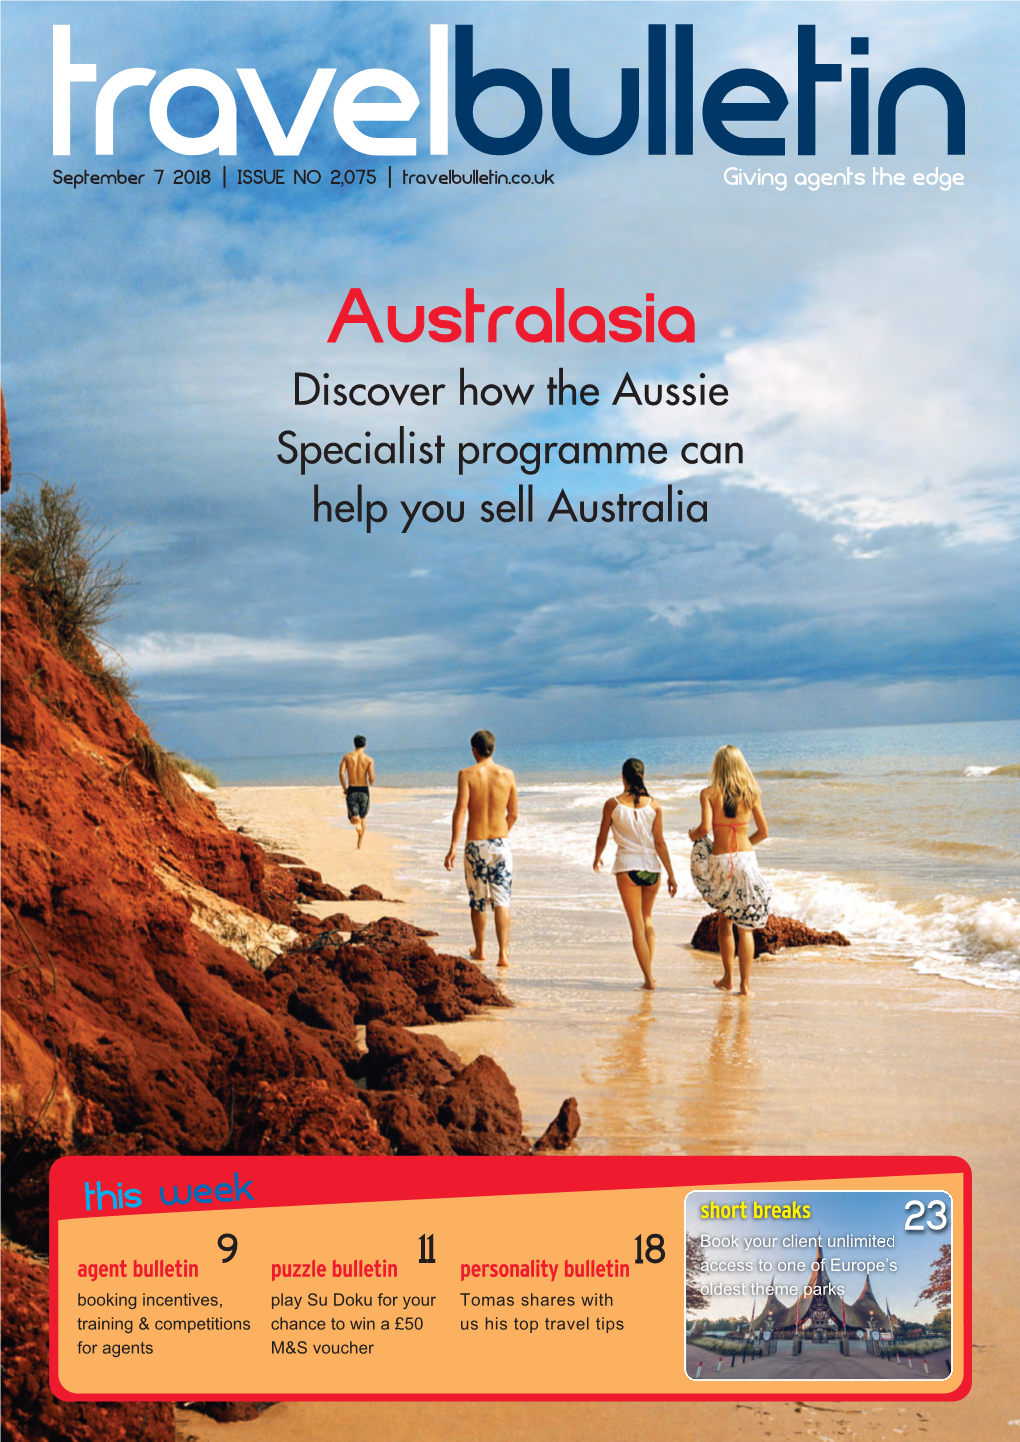 Australasia Discover How the Aussie Specialist Programme Can Help You Sell Australia